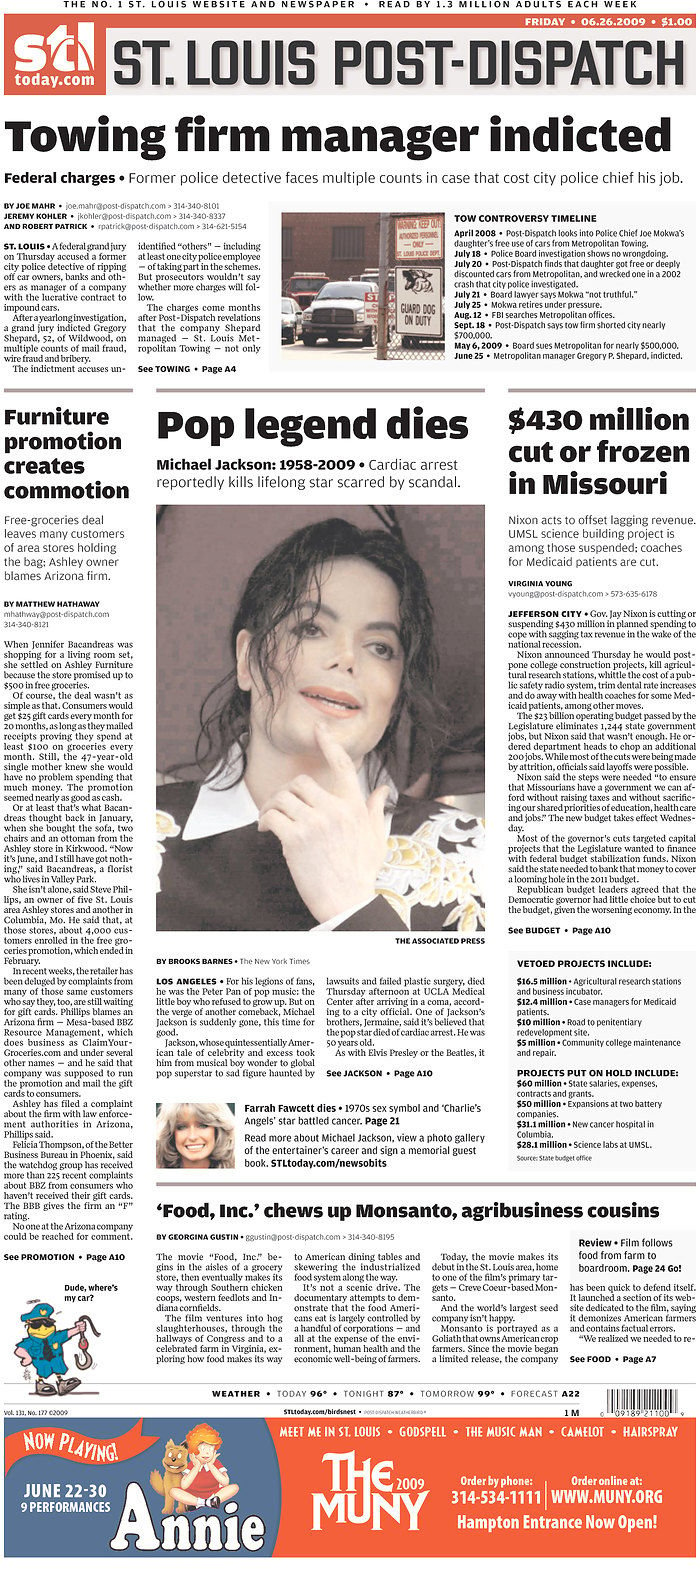 Share your thoughts on the display of Michael Jackson's obituary The